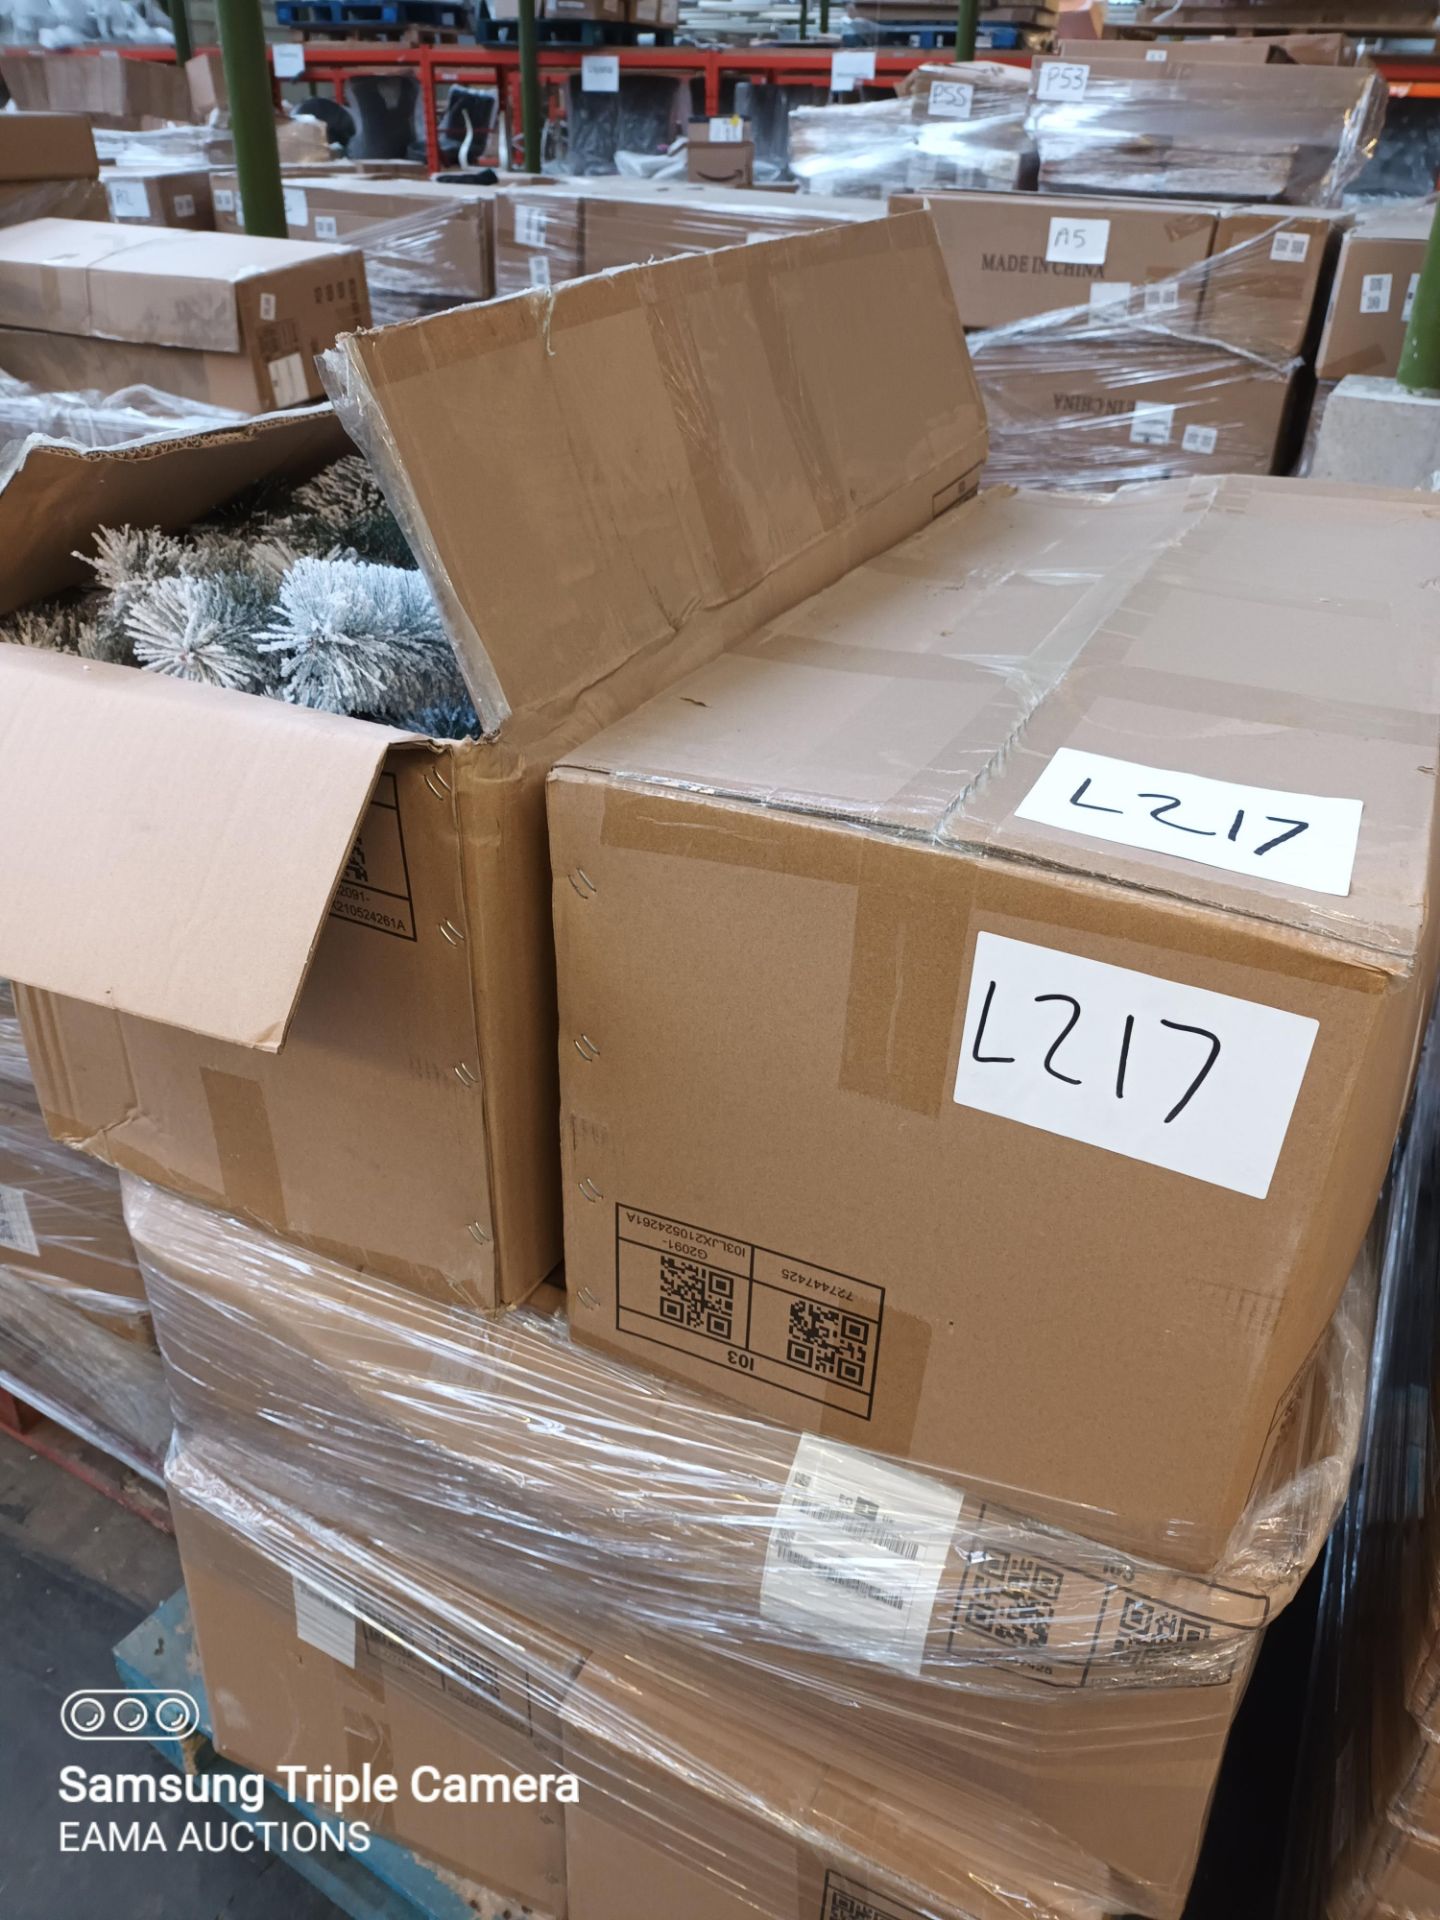 L217 - 1 PALLET CONTAINING APPROX 6 BRAND NEW ARTIFICIAL XMAS TREES SNOW EFFECT - NO LEAFLETS - Image 2 of 2